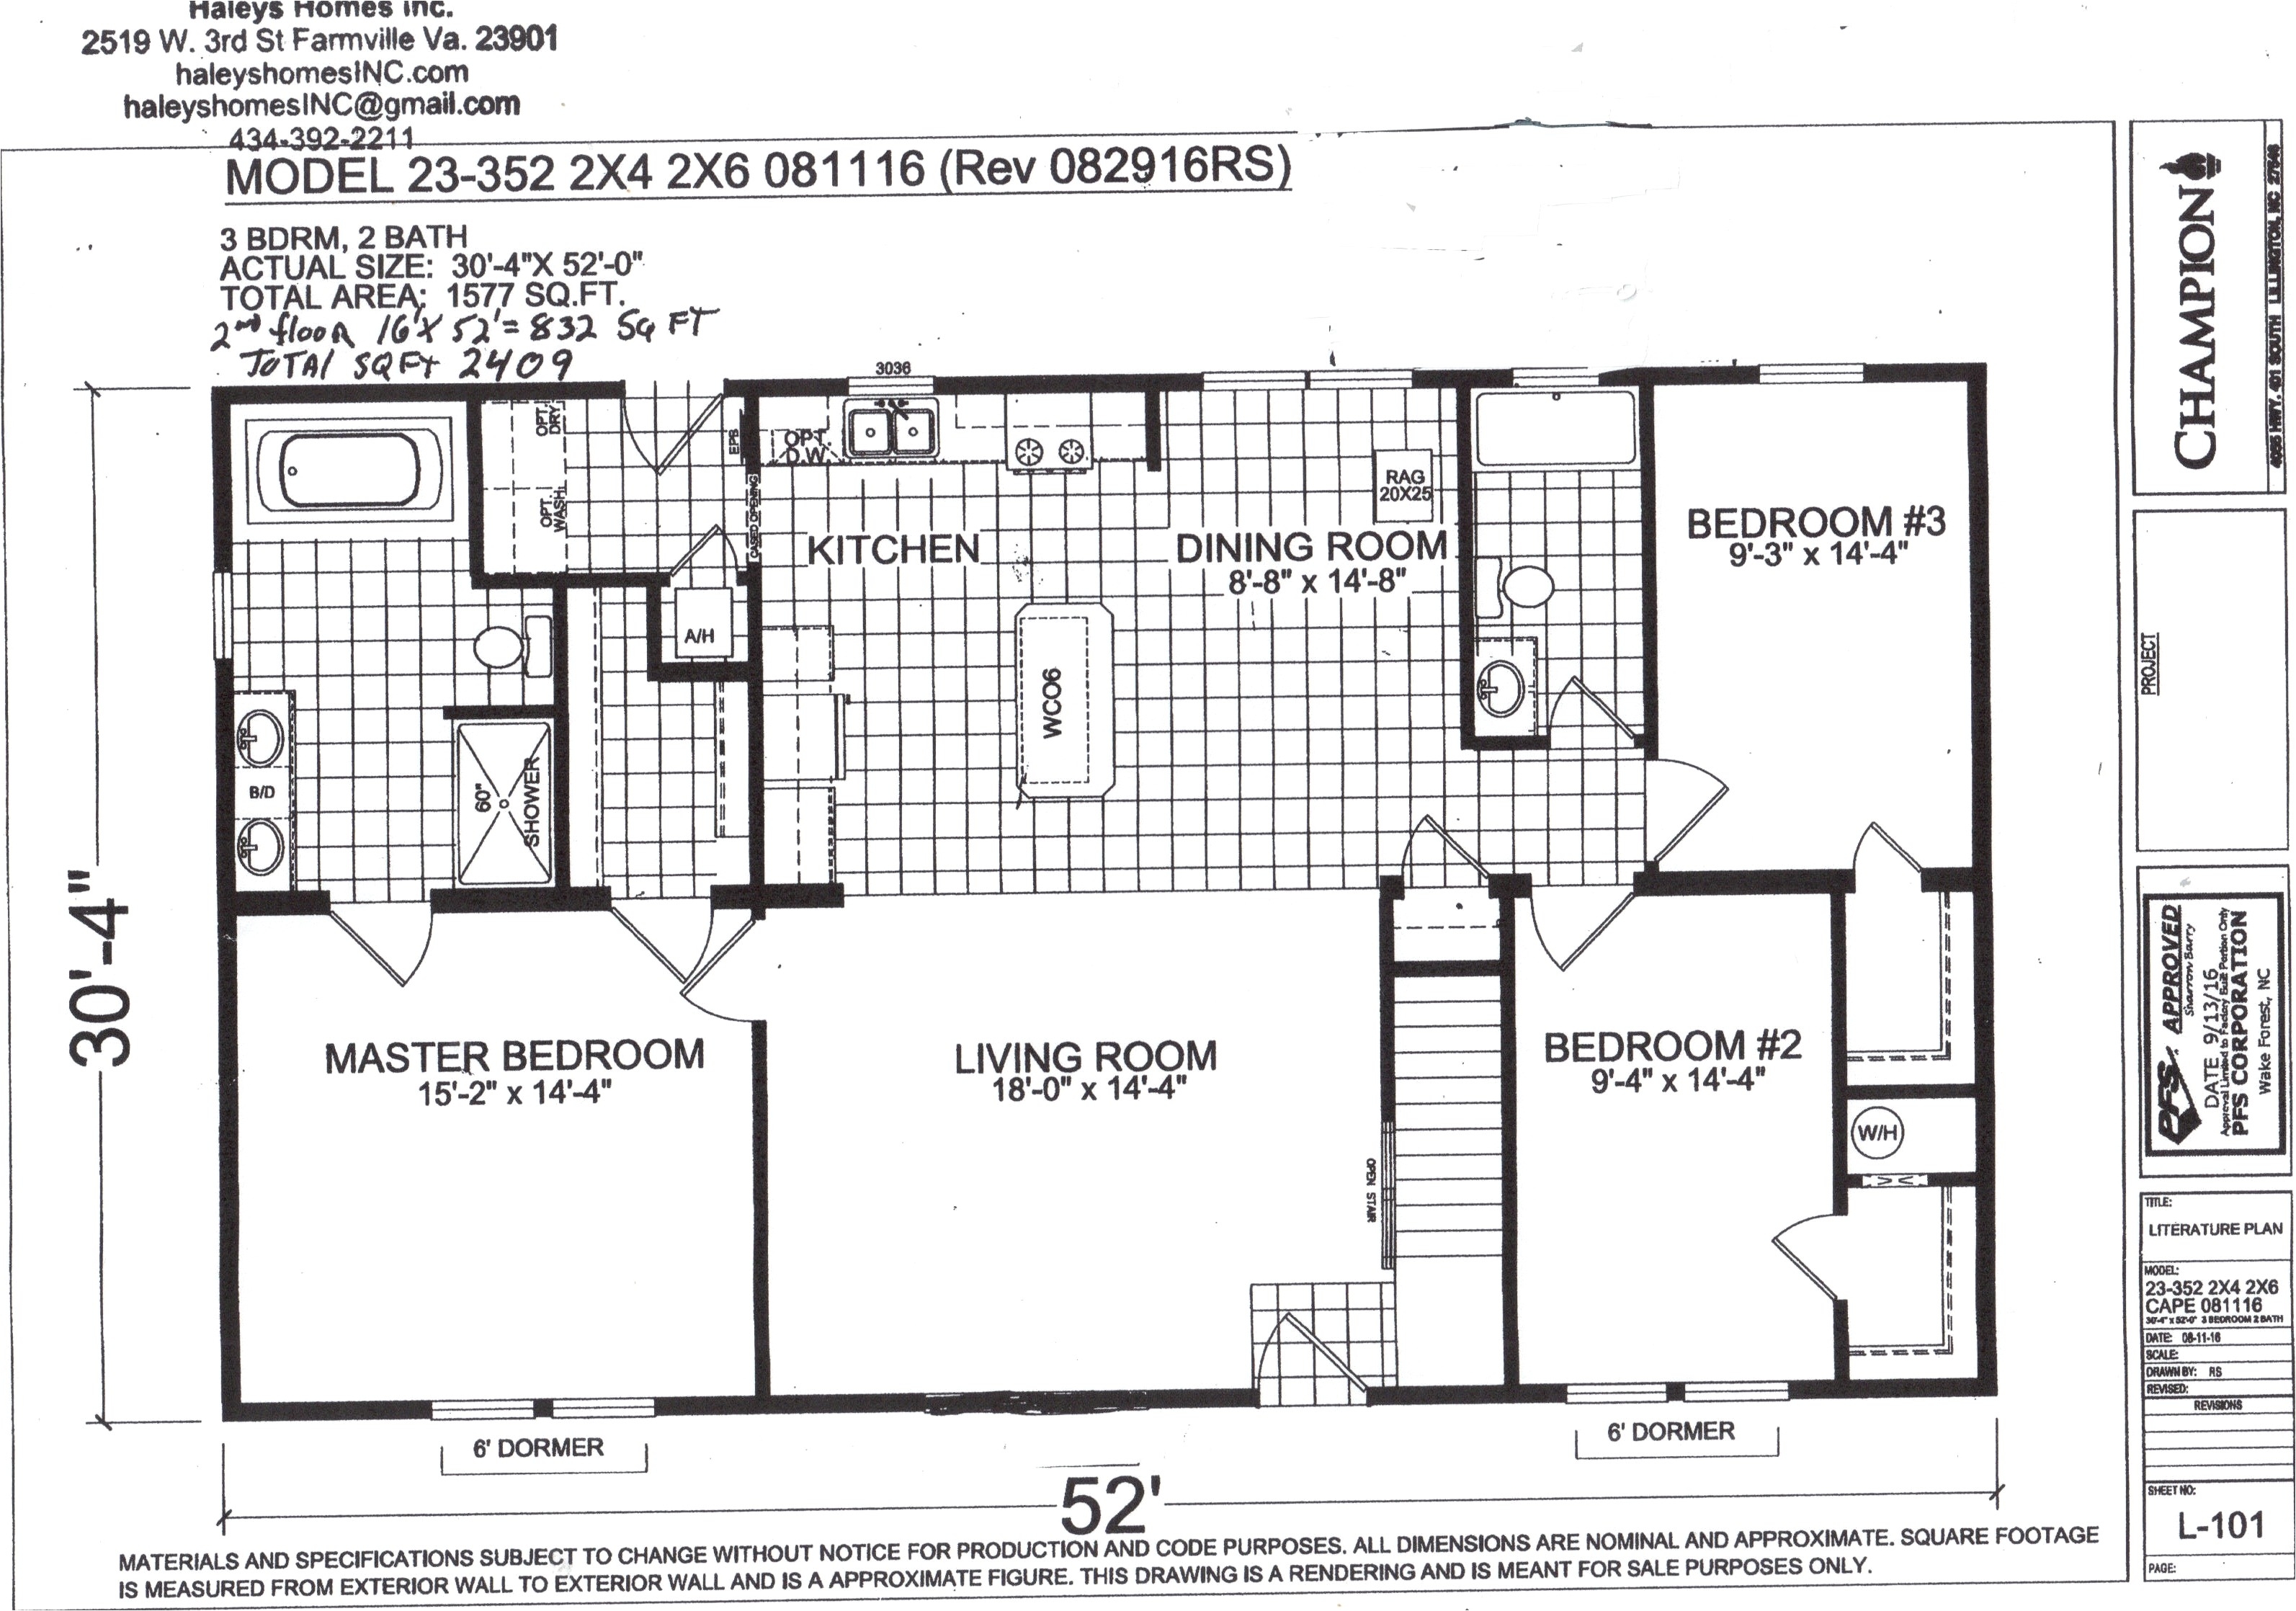 homes of merit modular floor plans awesome pratt modular home floor plans manufactured homes floor plans